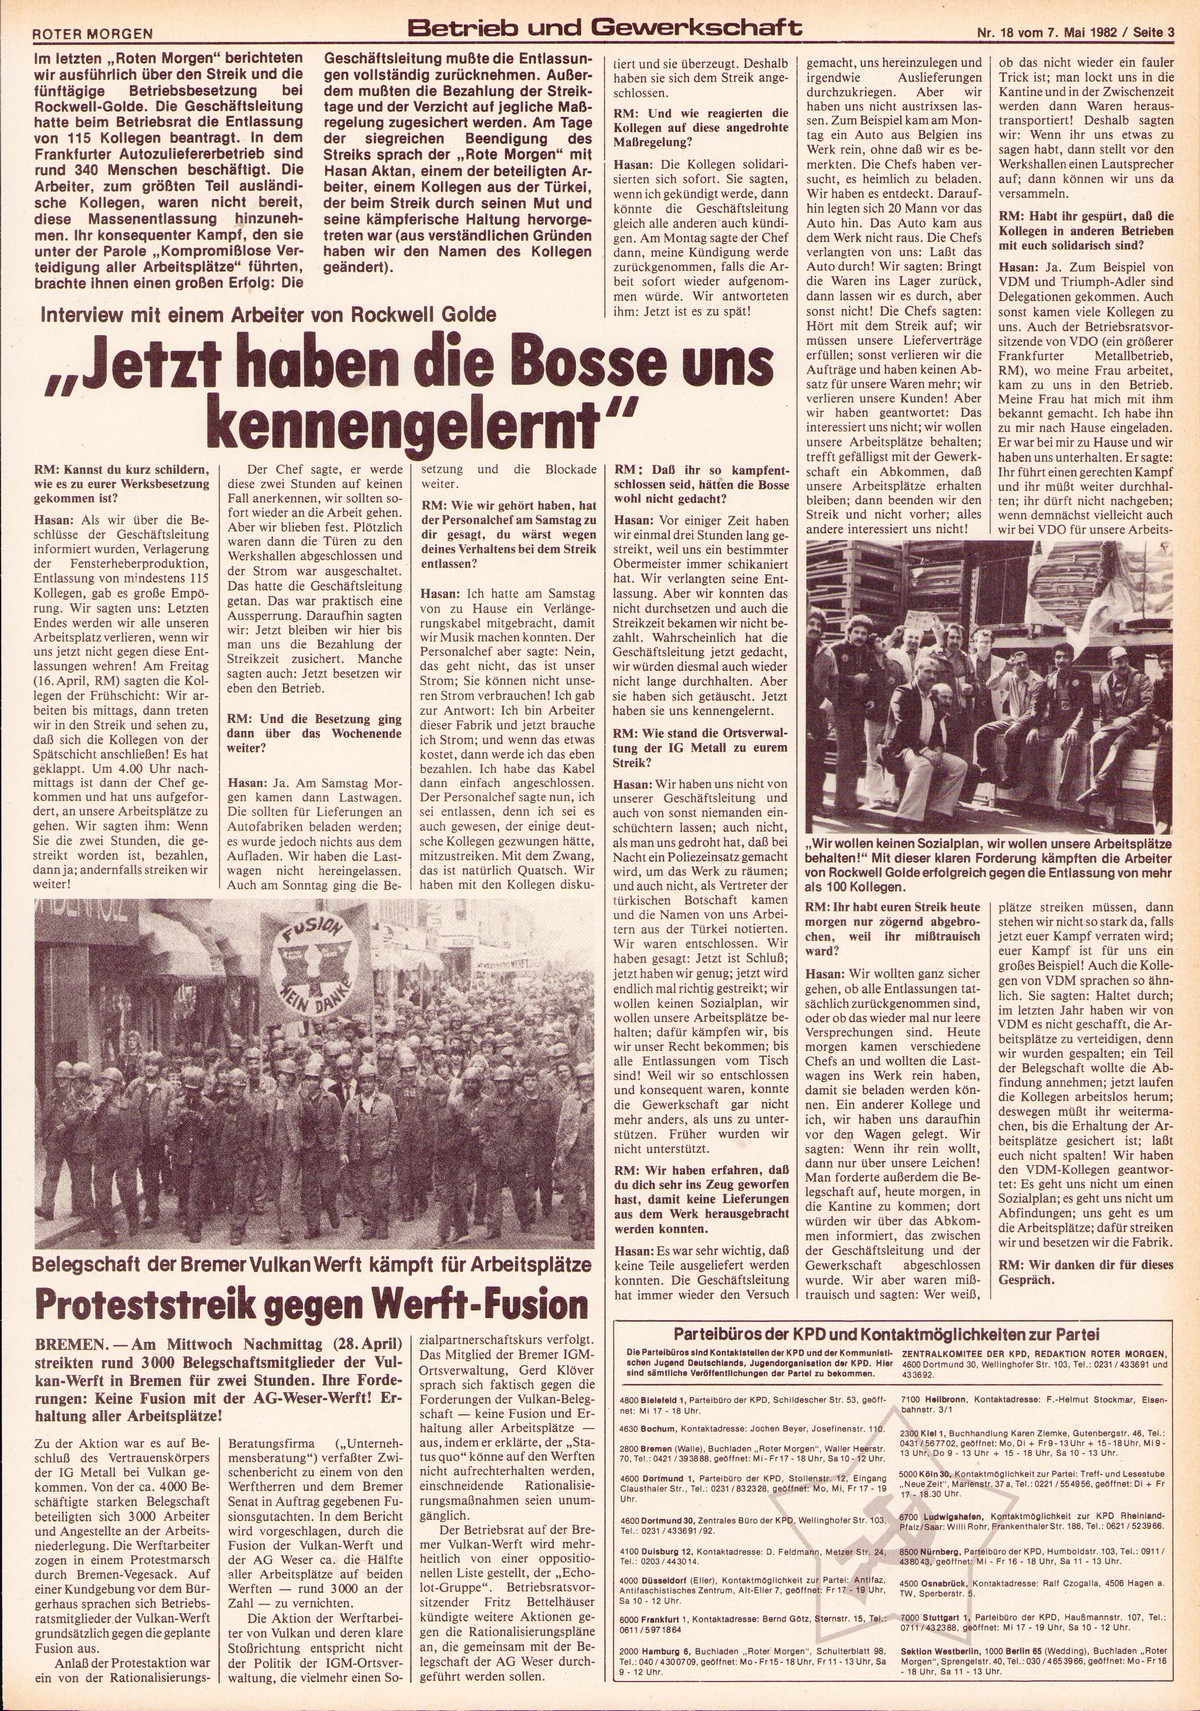 Roter Morgen, 16. Jg., 7. Mail 1982, Nr. 18, Seite 3